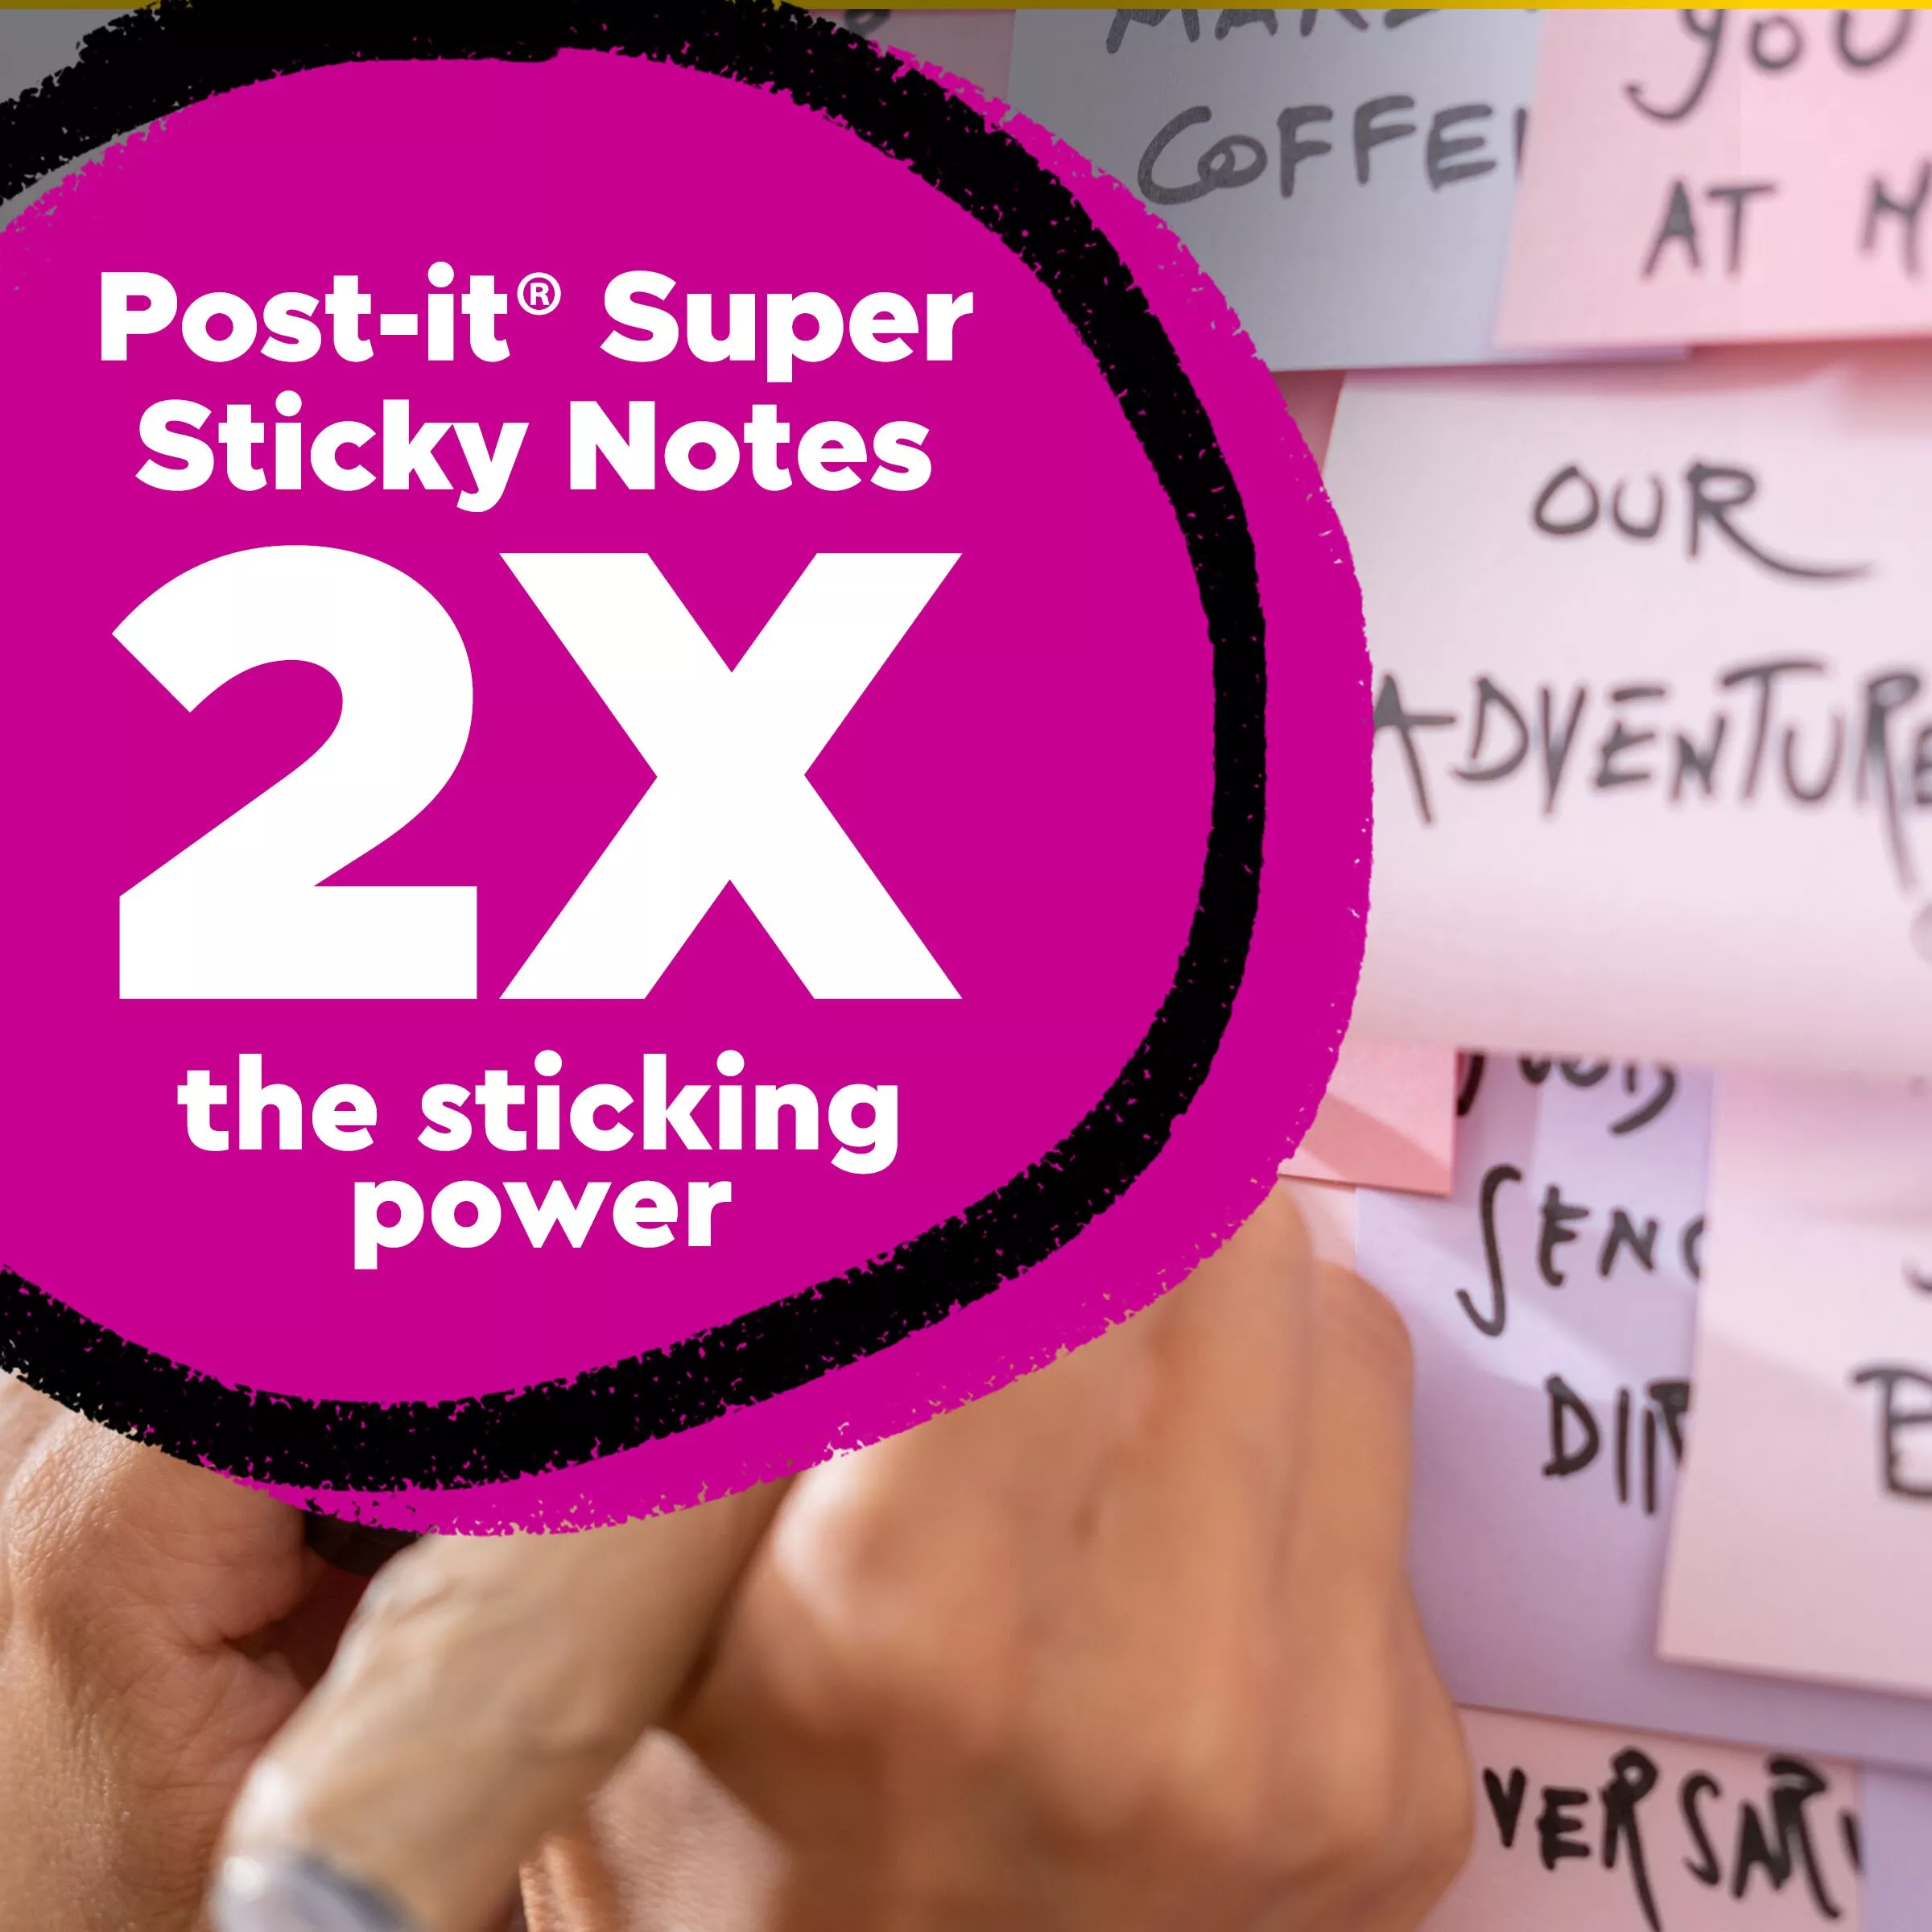 Product Number 675R-3SSNRP | Post-it® Super Sticky Recycled Notes 675R-3SSNRP